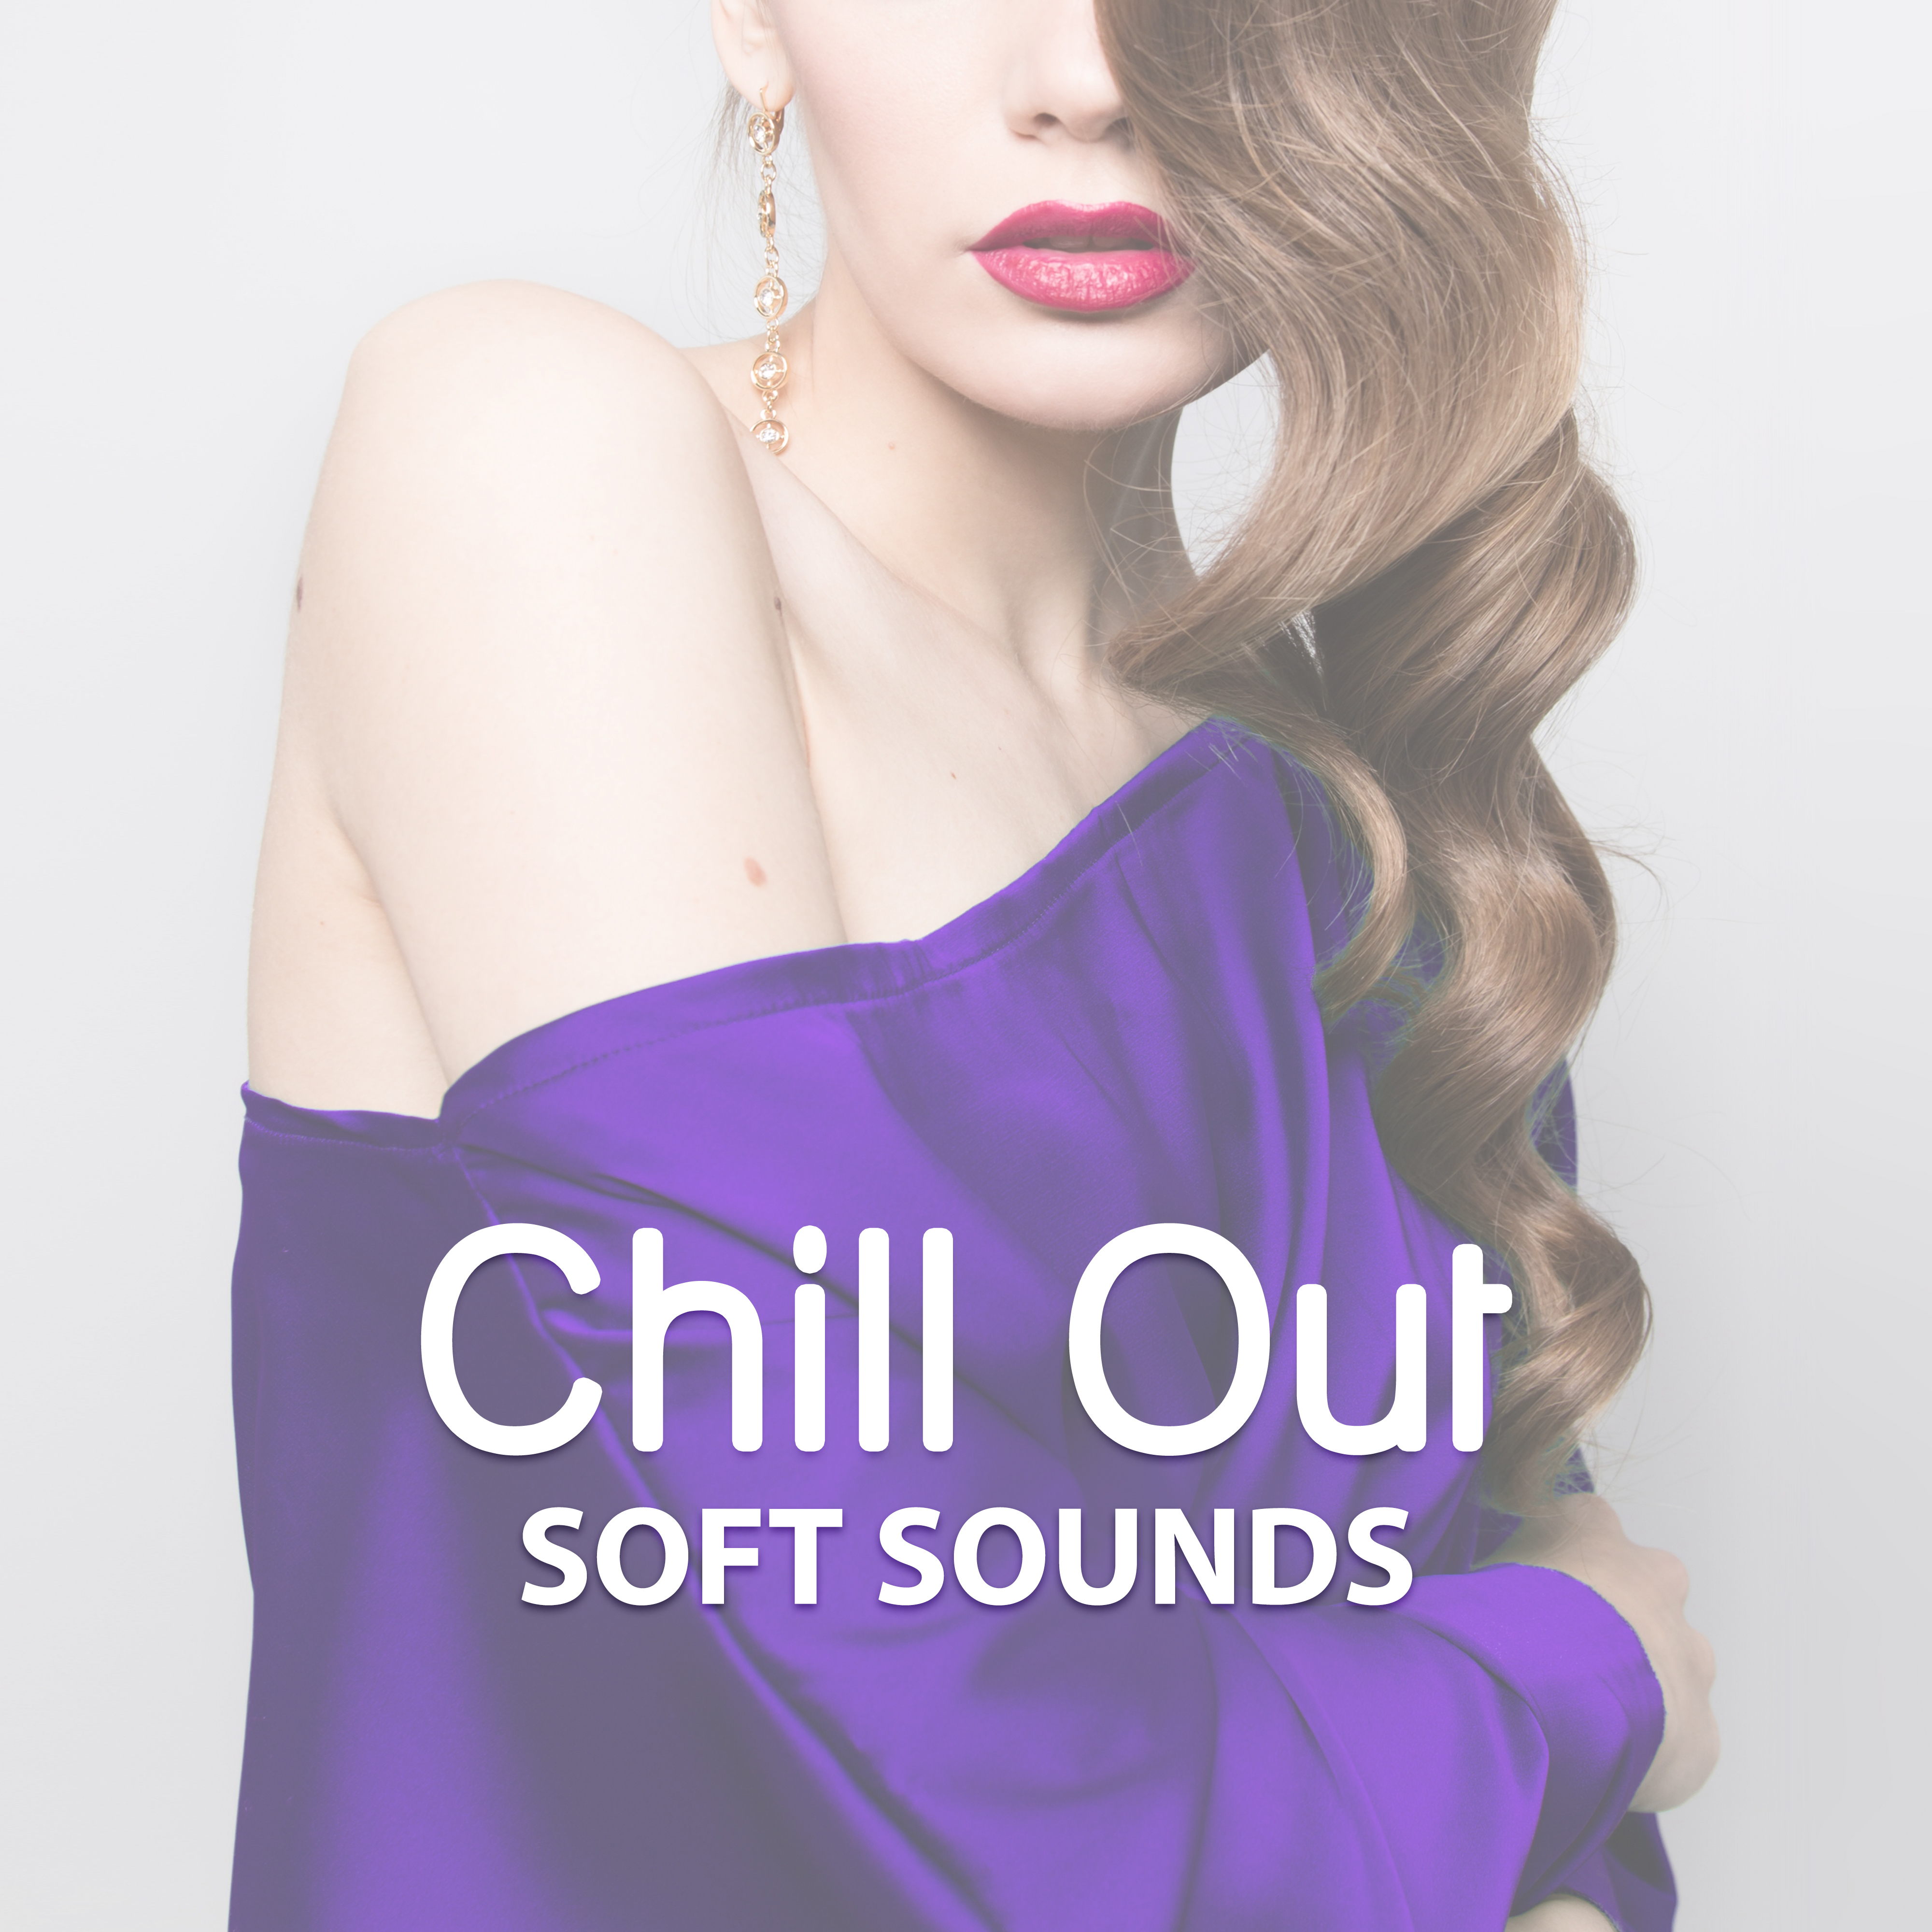 Chill Out Soft Sounds  Rest on the Beach, Tropical Island, Holiday Time, Stress Relief